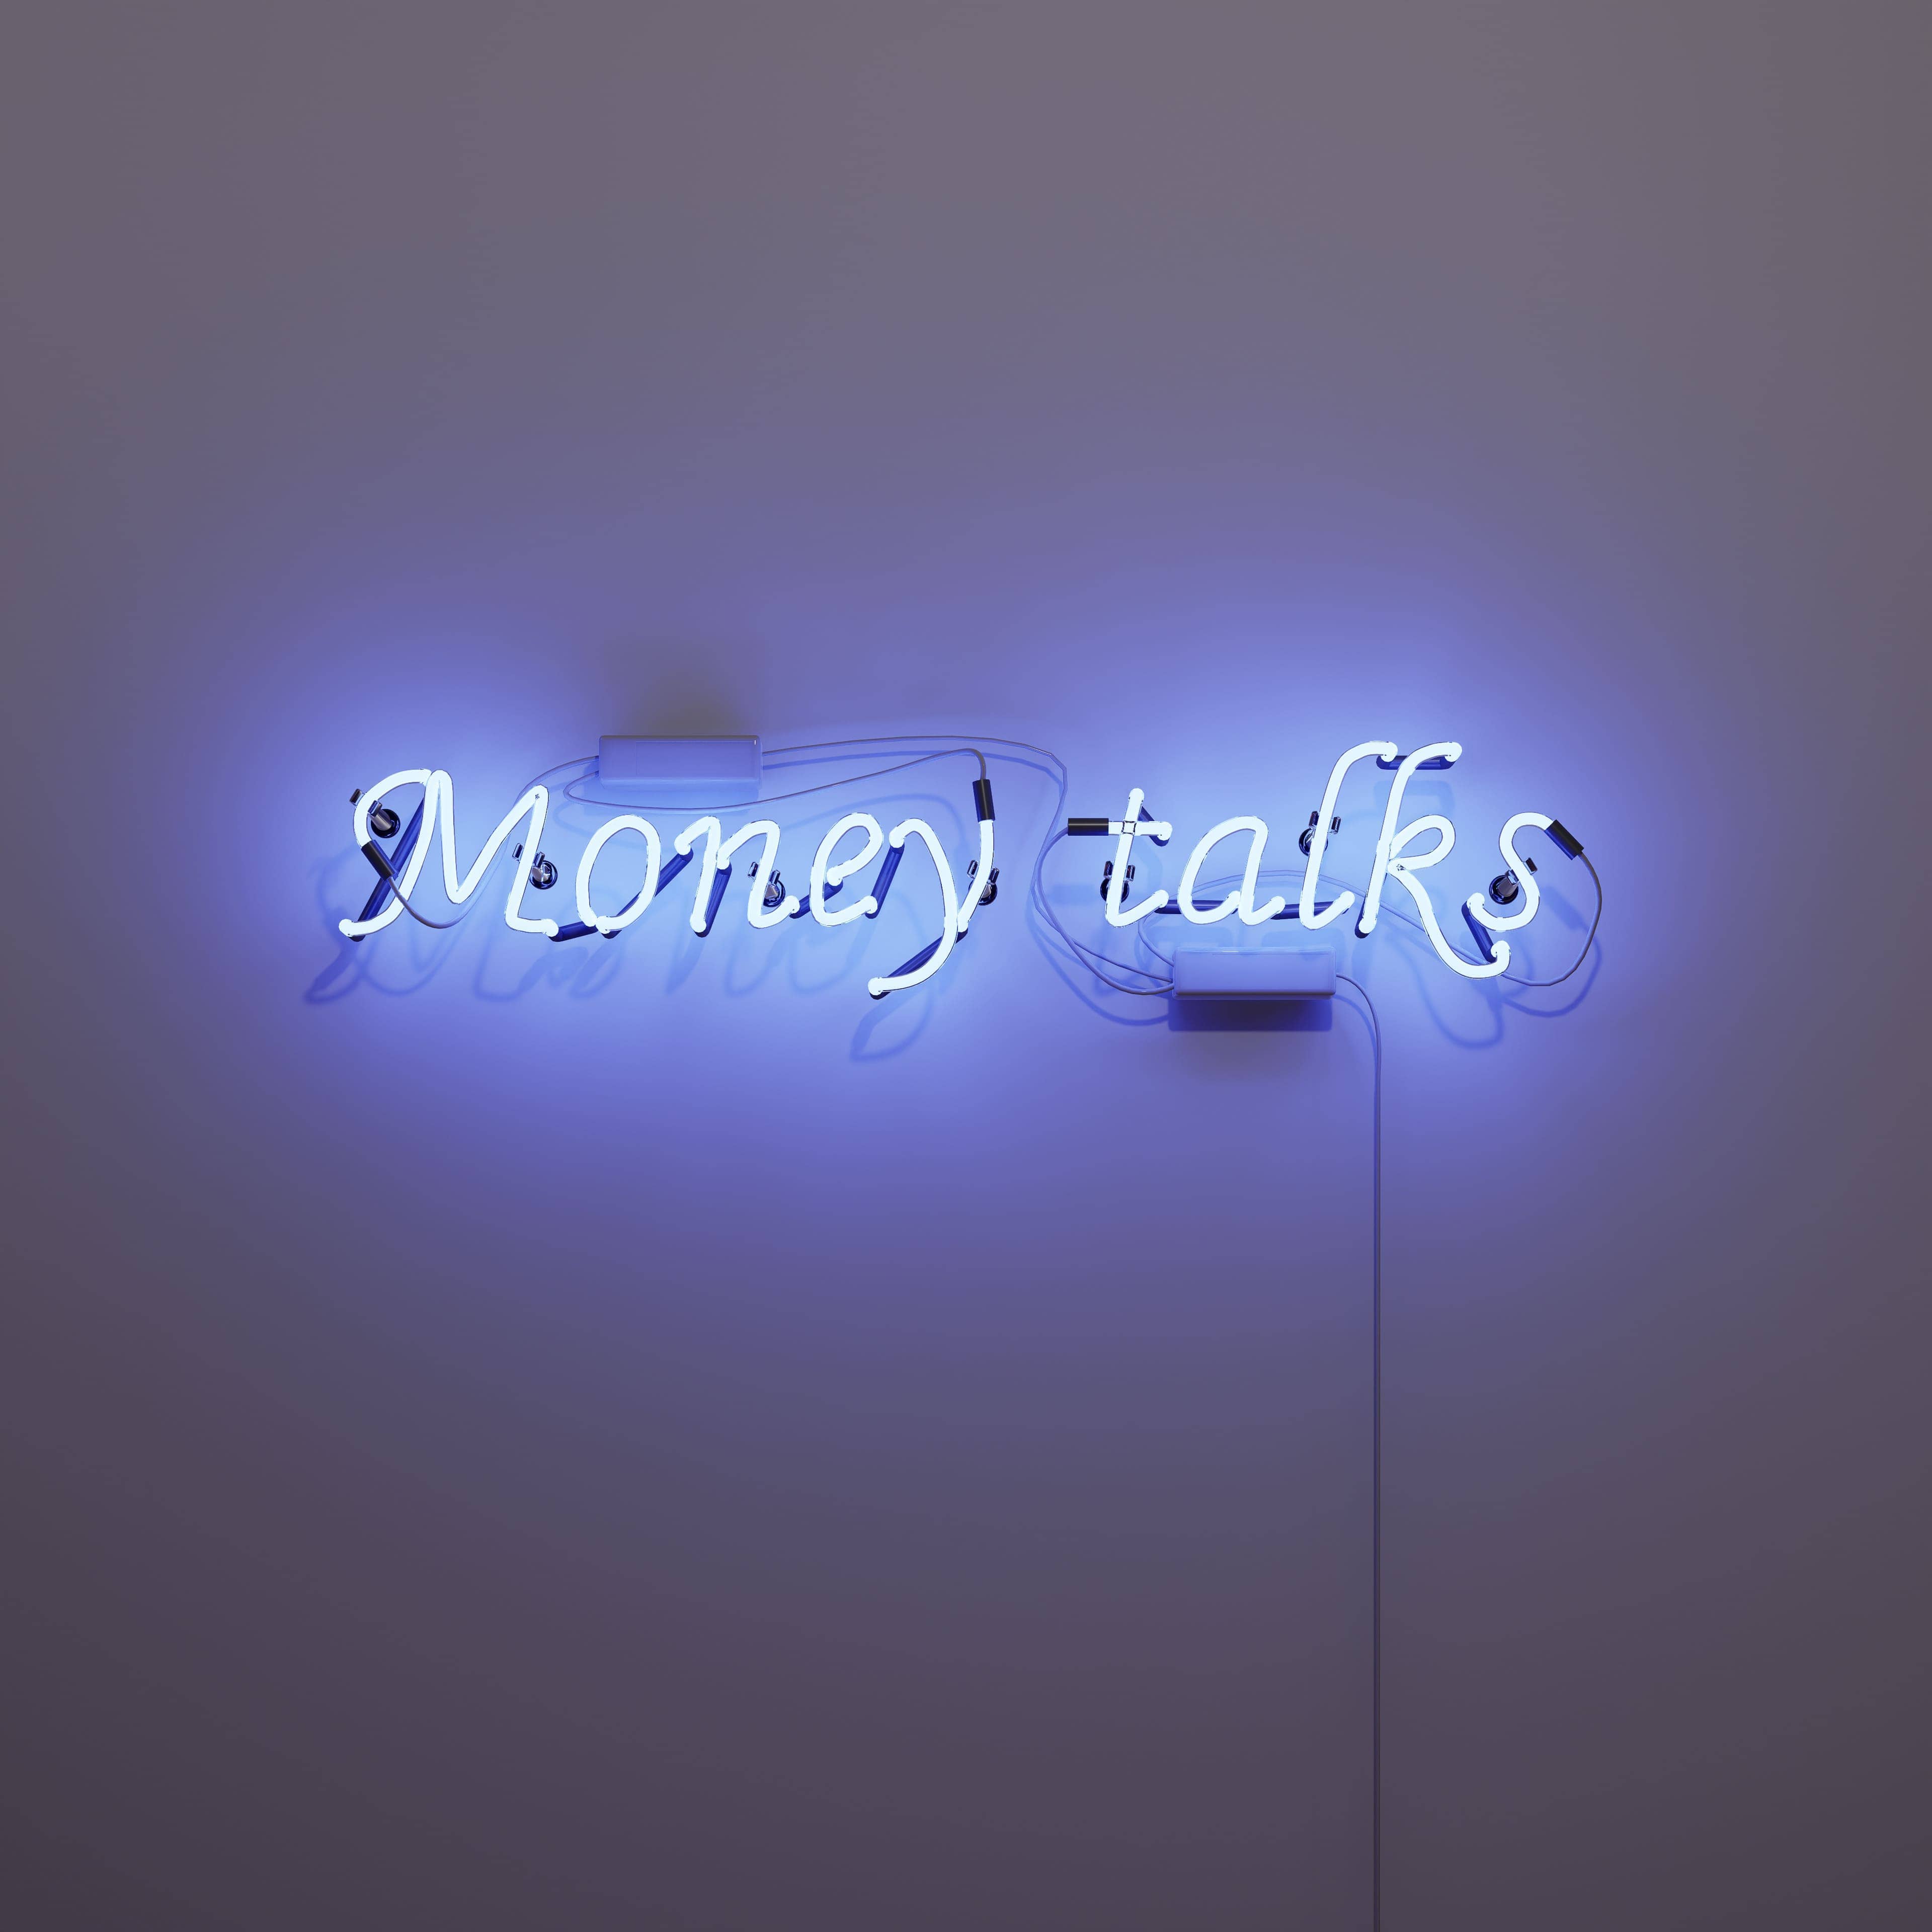 vintage-neon-signs-and-the-language-of-money